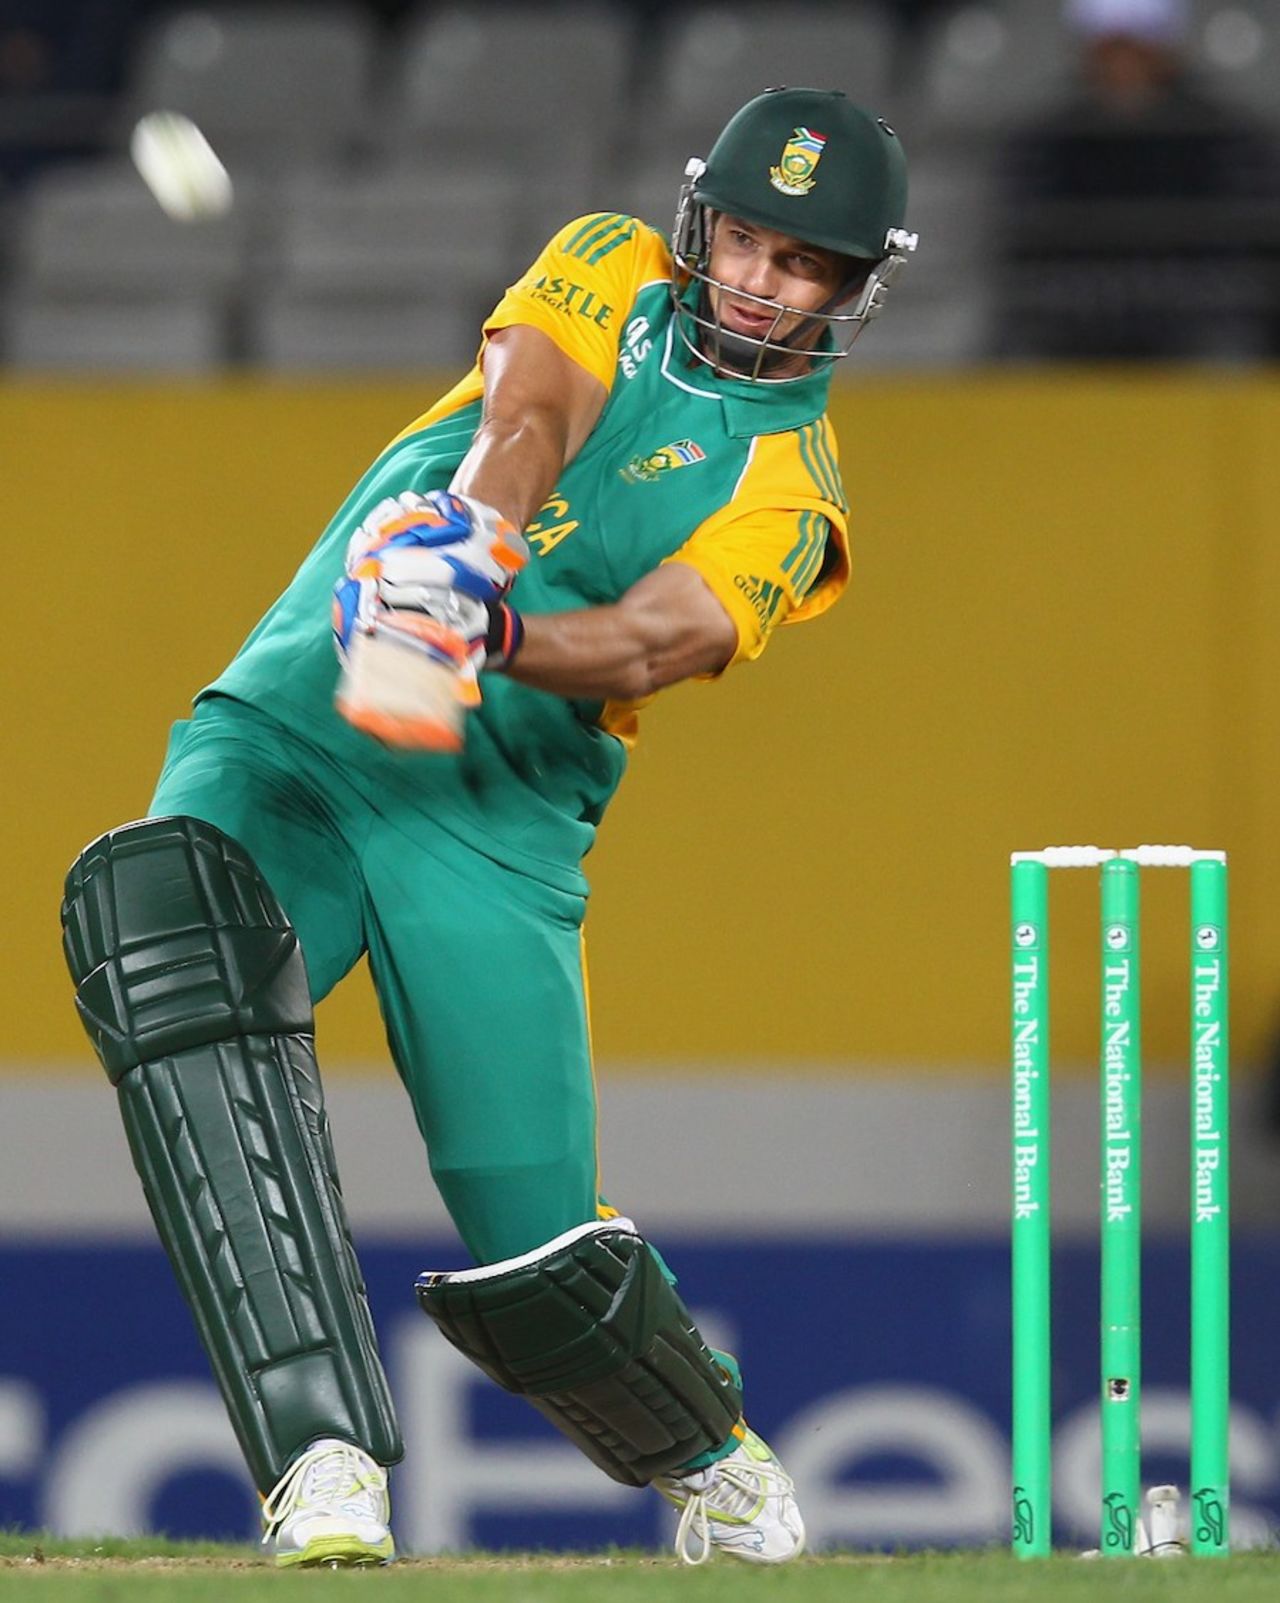 Albie Morkel launches the ball for six, New Zealand v South Africa, 3rd ODI, Auckland, March 3, 2012